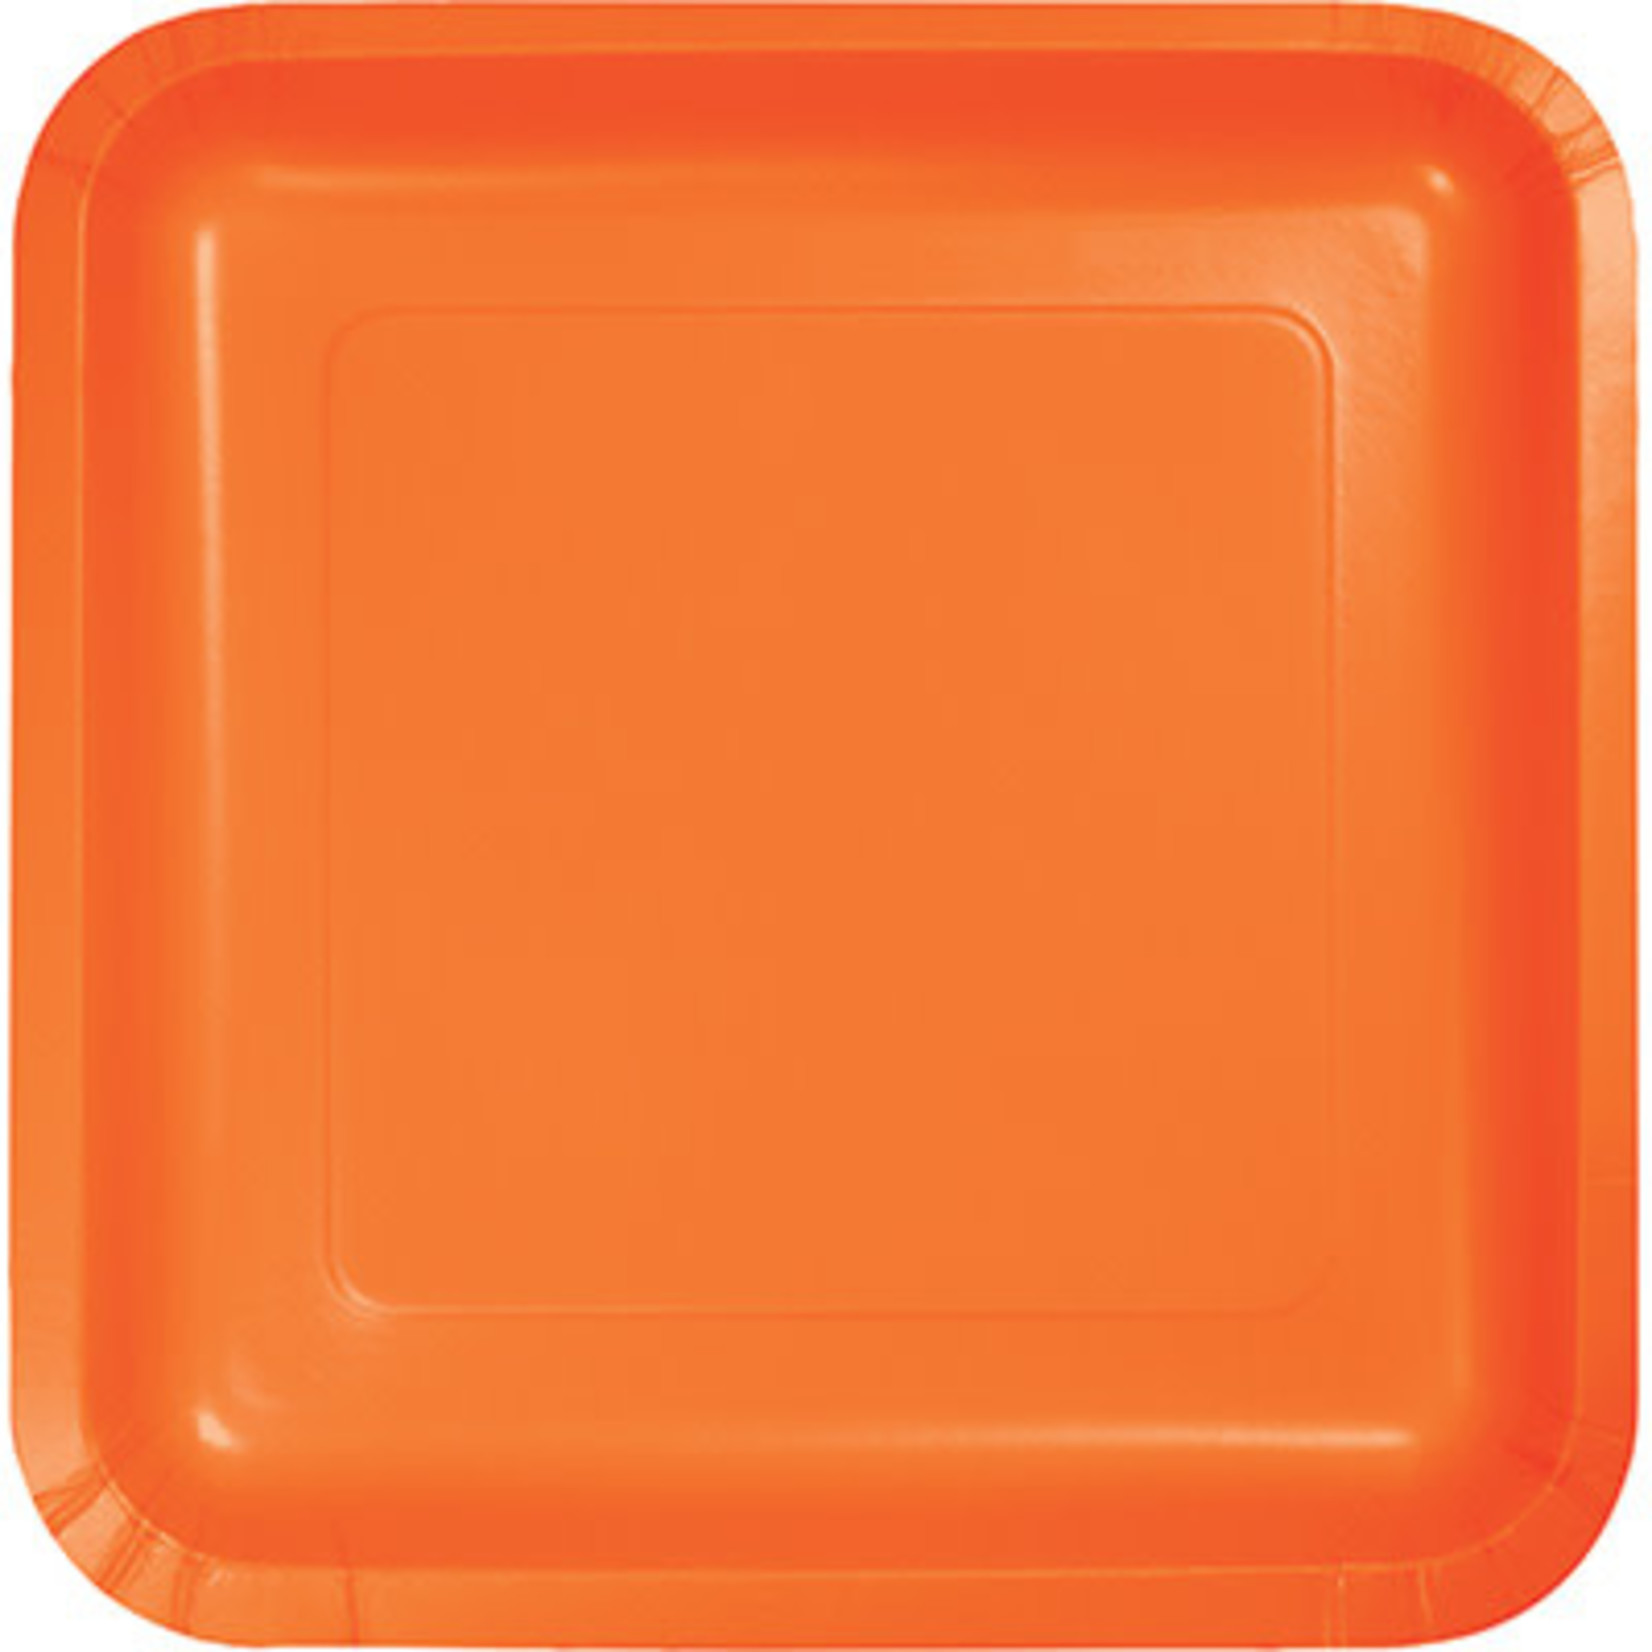 Touch of Color 9" Sunkissed Orange Square Paper Plates - 18ct.